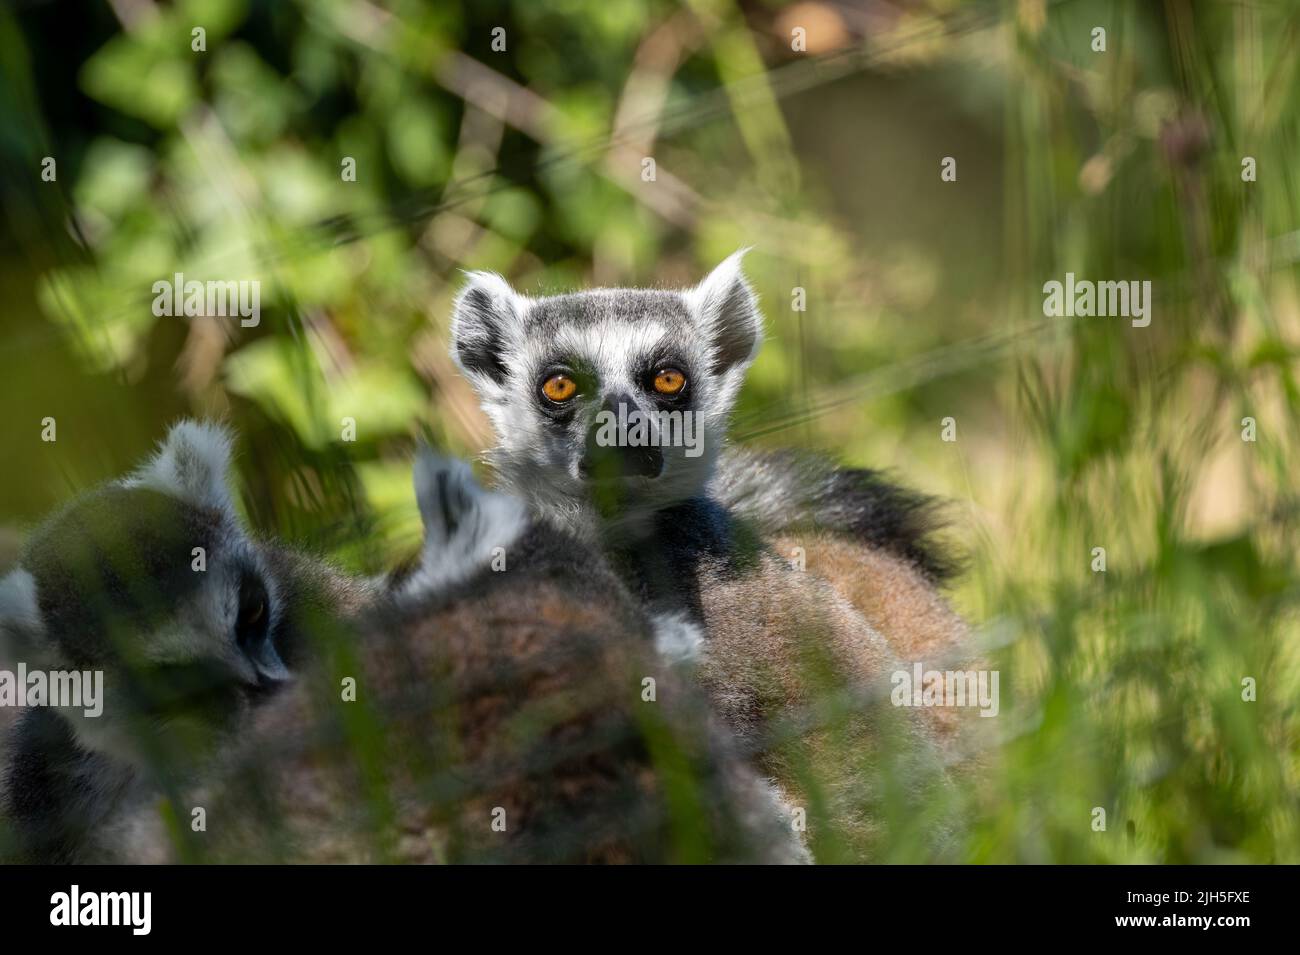 A group of alert, resting ring-tailed lemurs, Lemur catta. A large strepsirrhine primate at Jersey zoo. Stock Photo